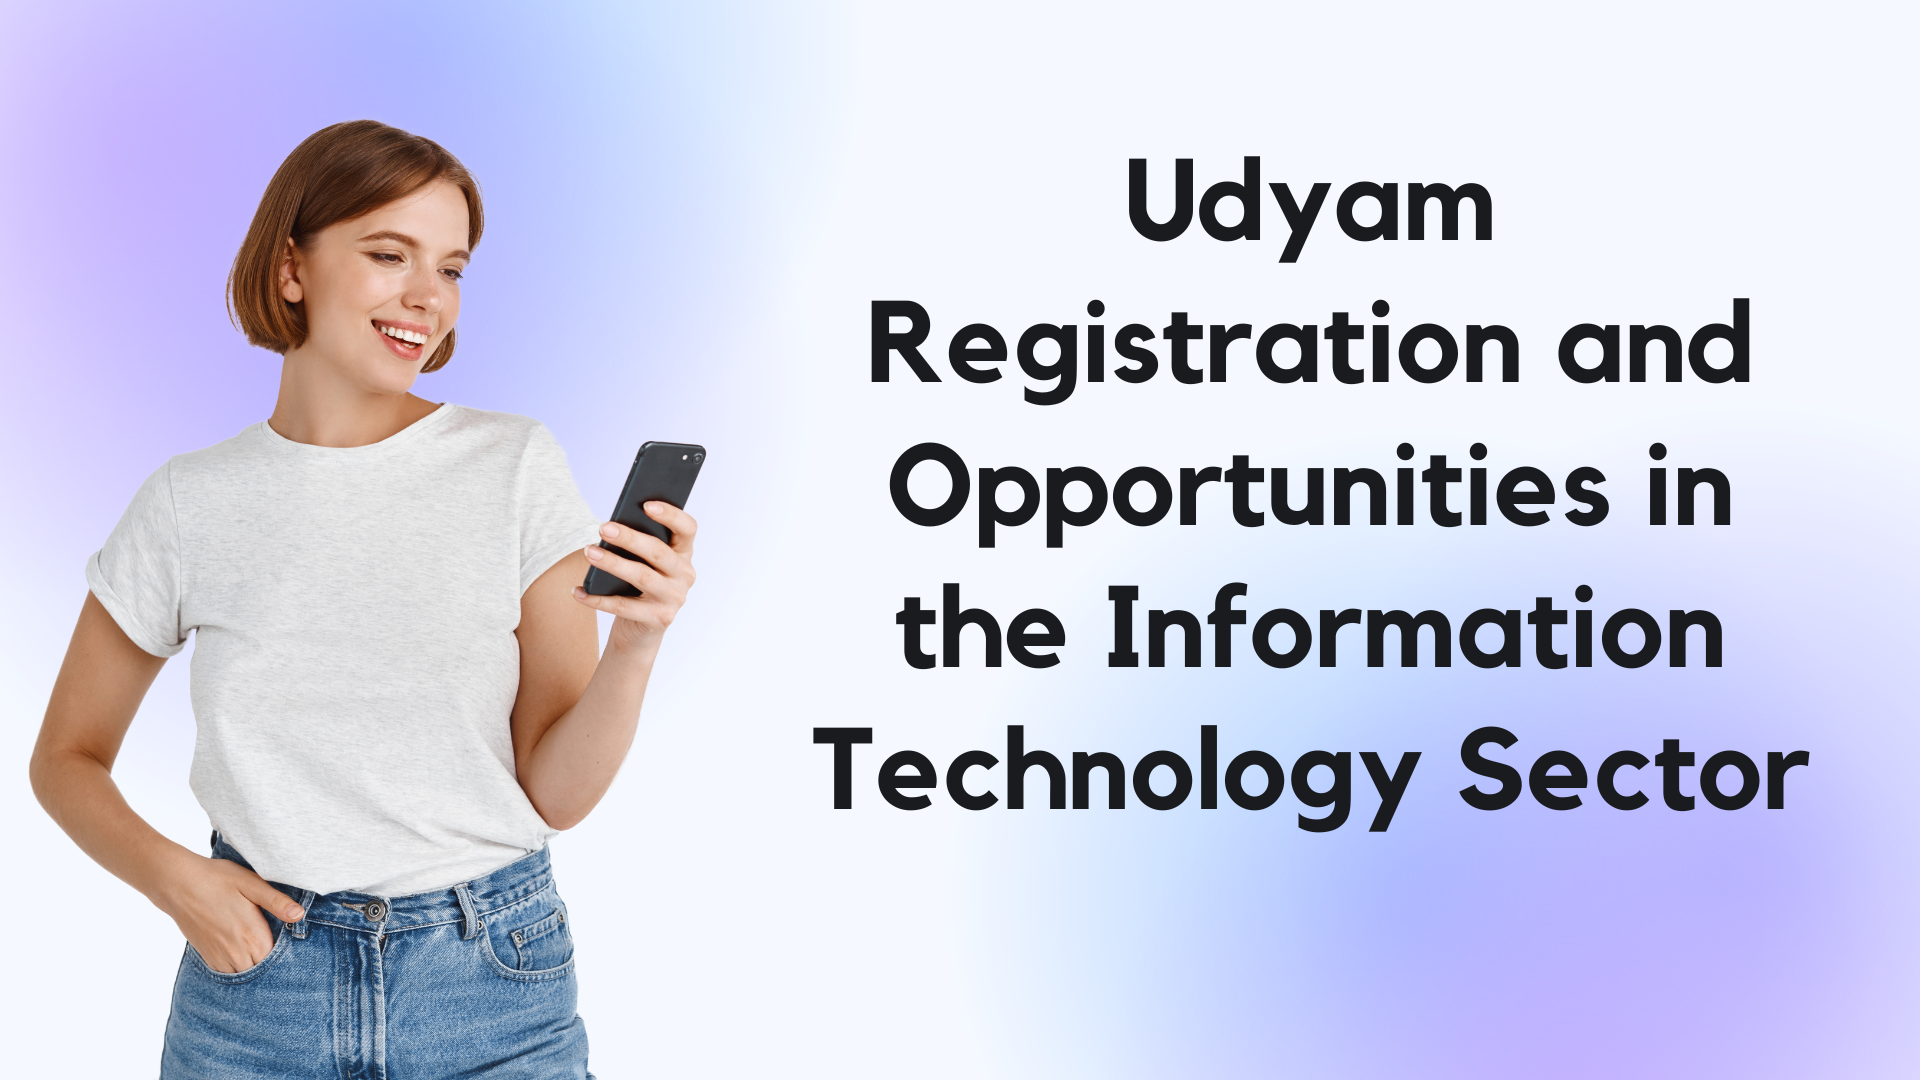 Udyam Registration and Opportunities in the Information Technology Sector